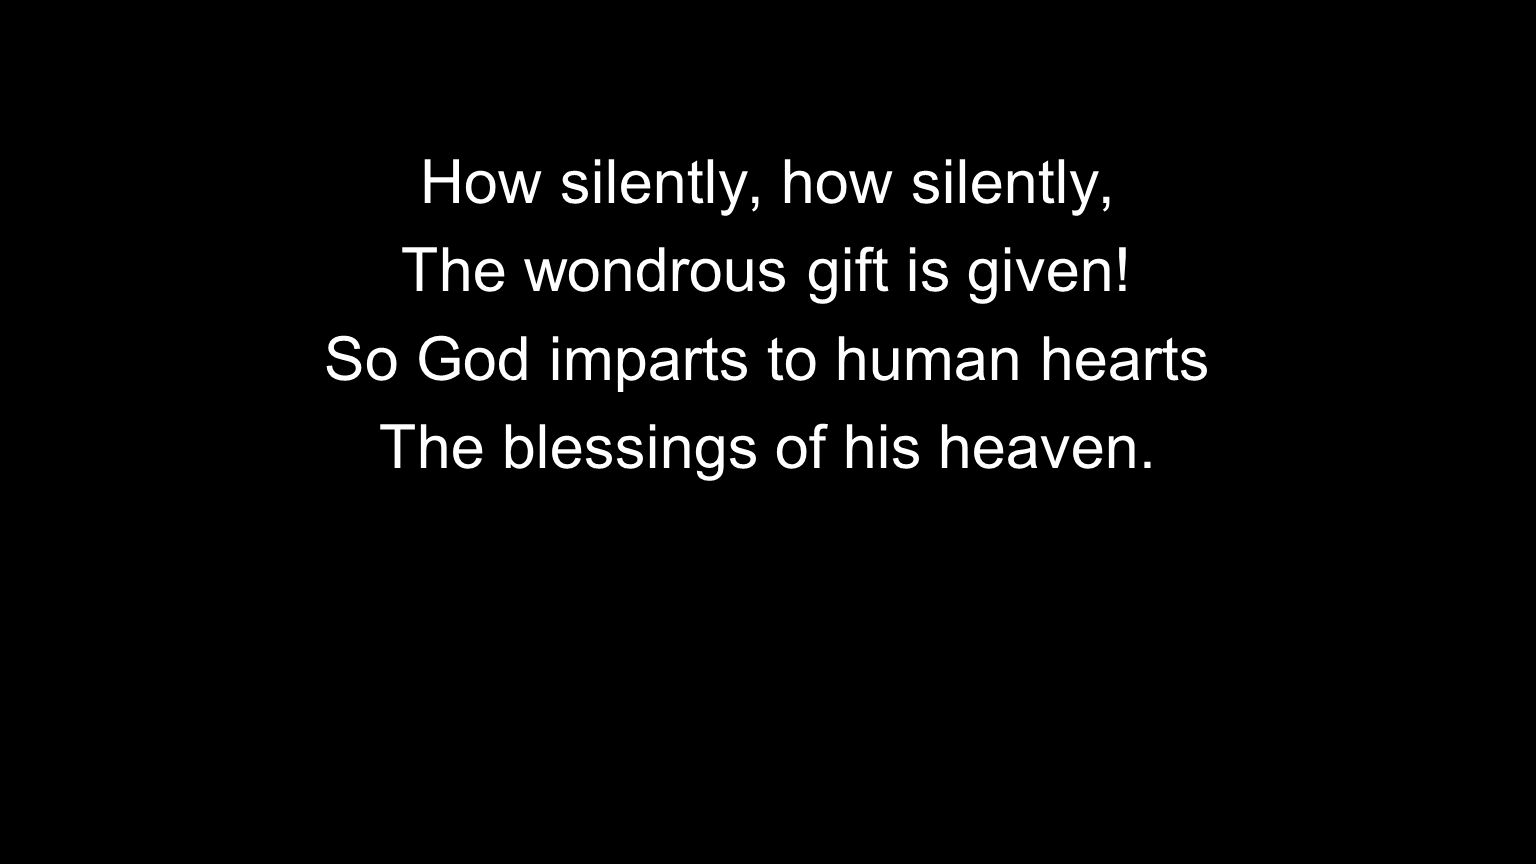 How silently, how silently, The wondrous gift is given.